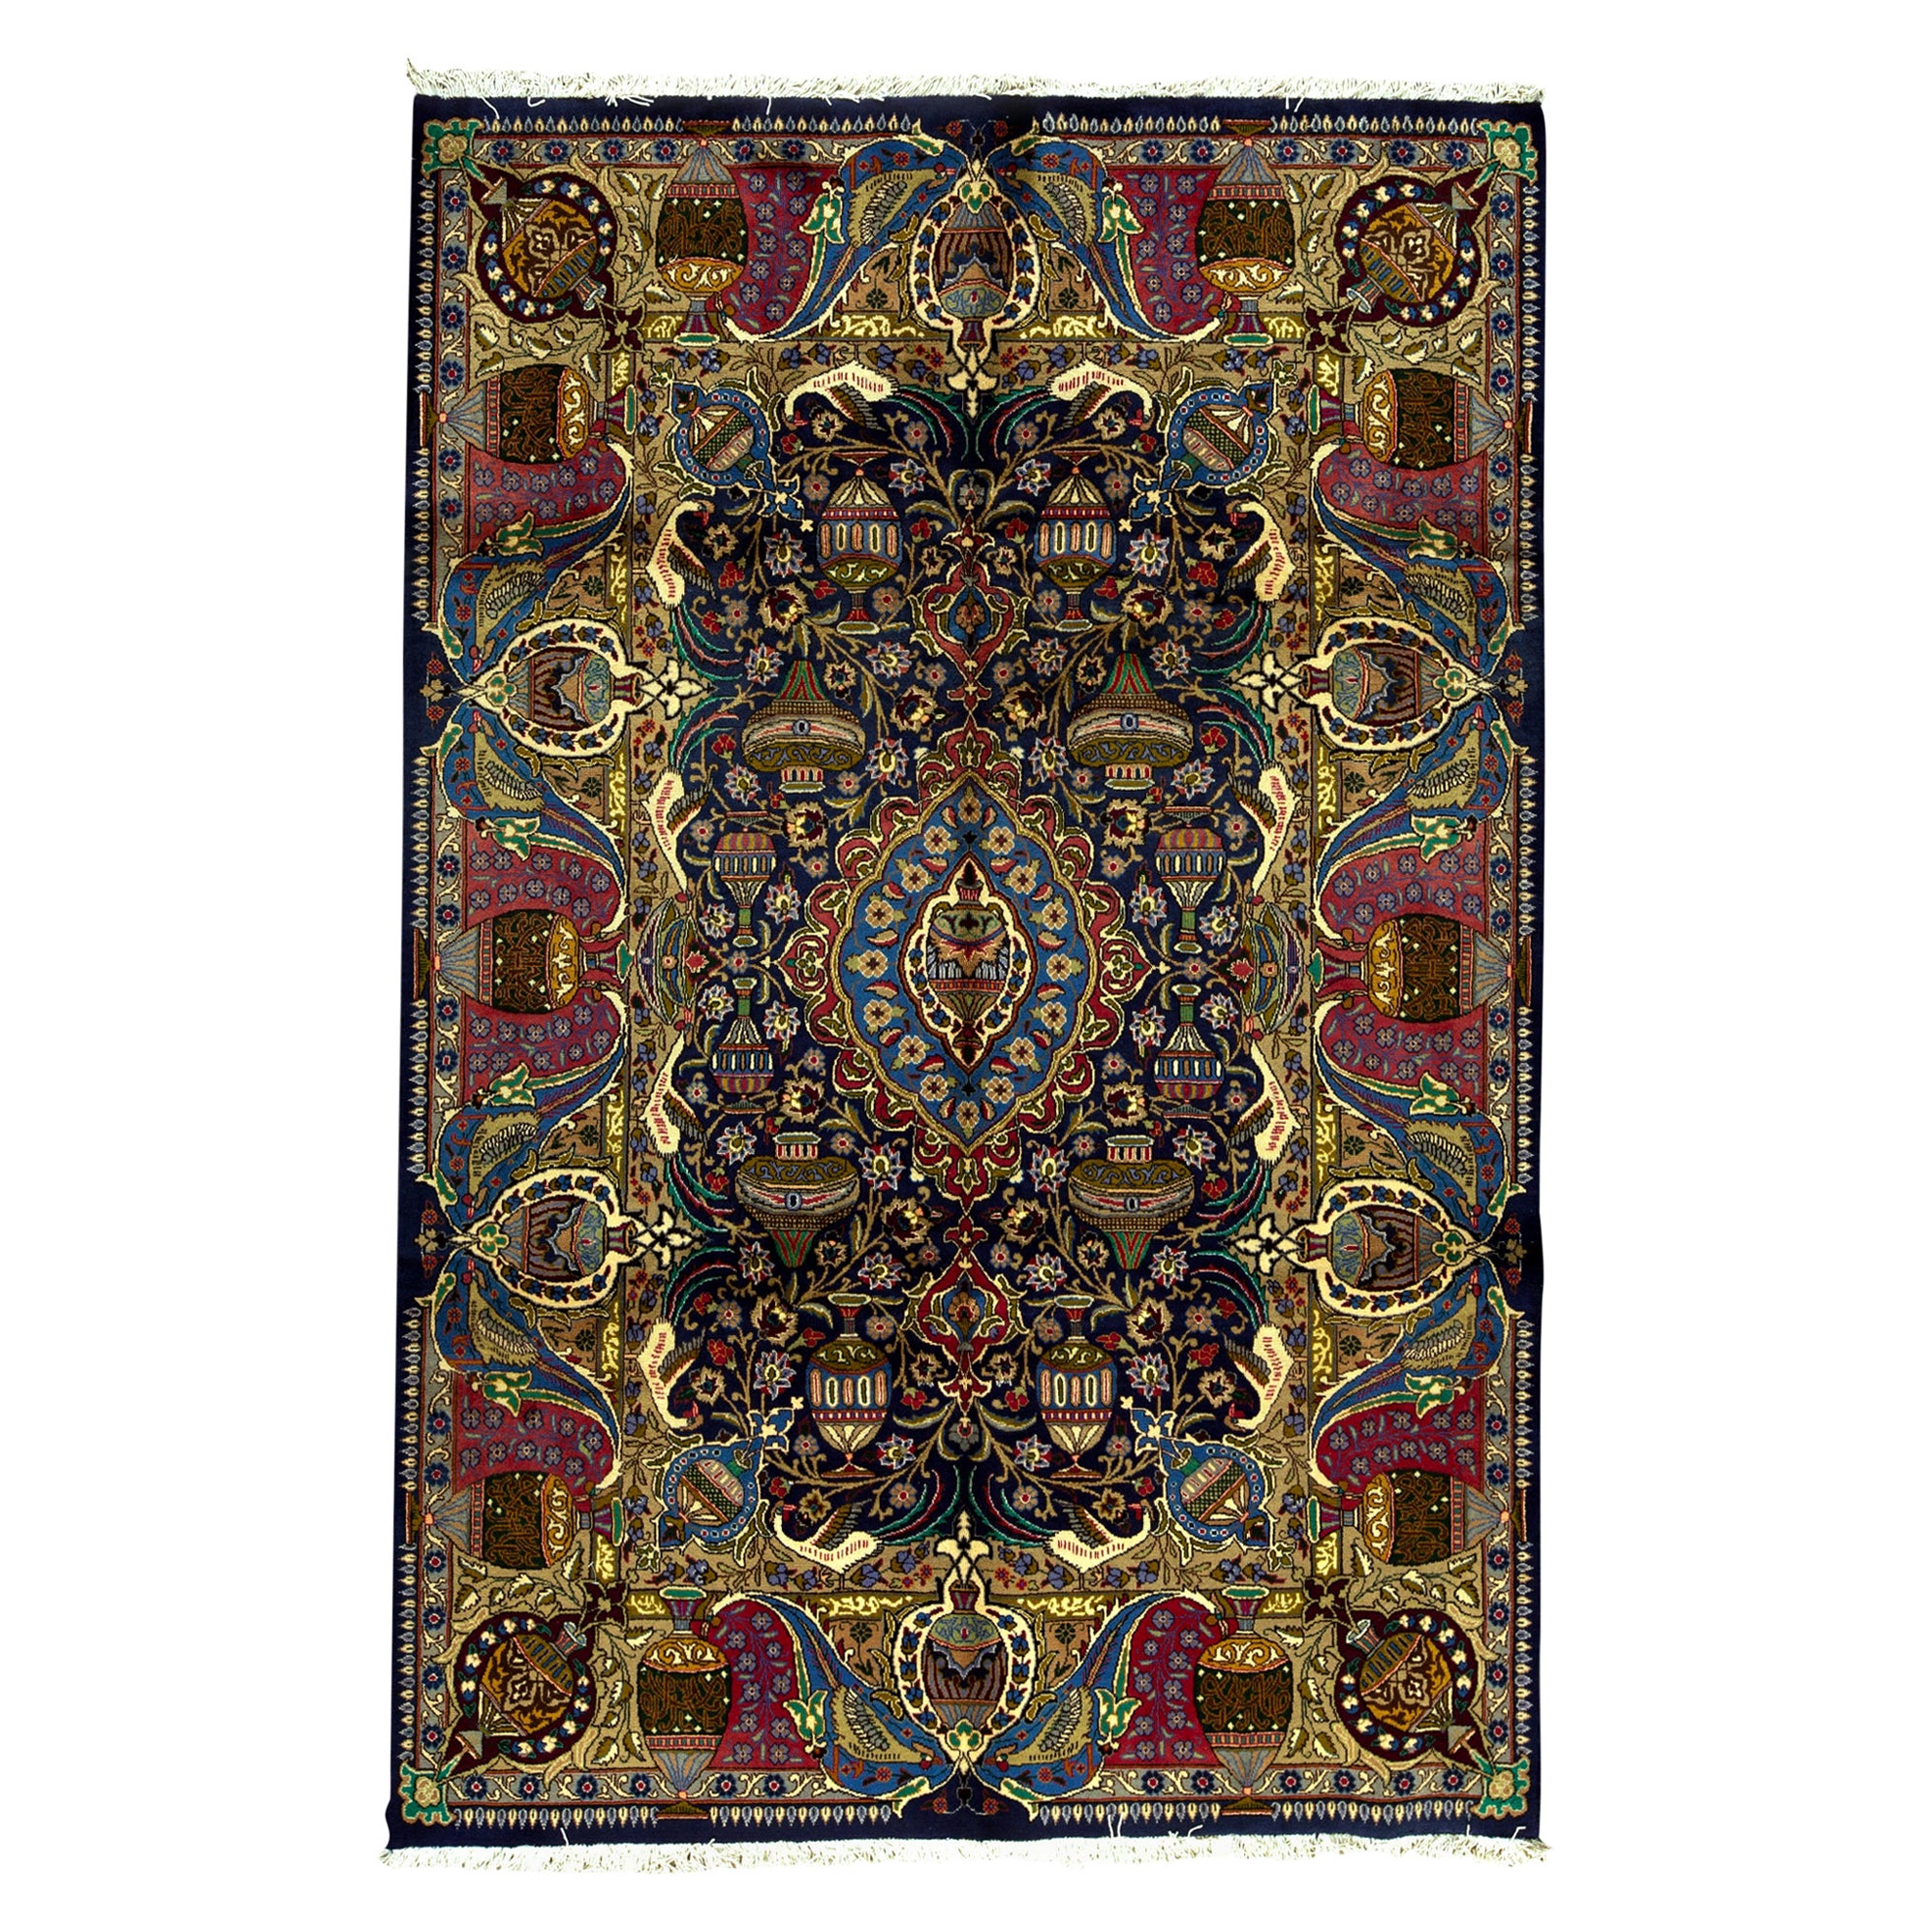 Antique Persian Fine Traditional Handwoven Luxury Wool Multi Rug